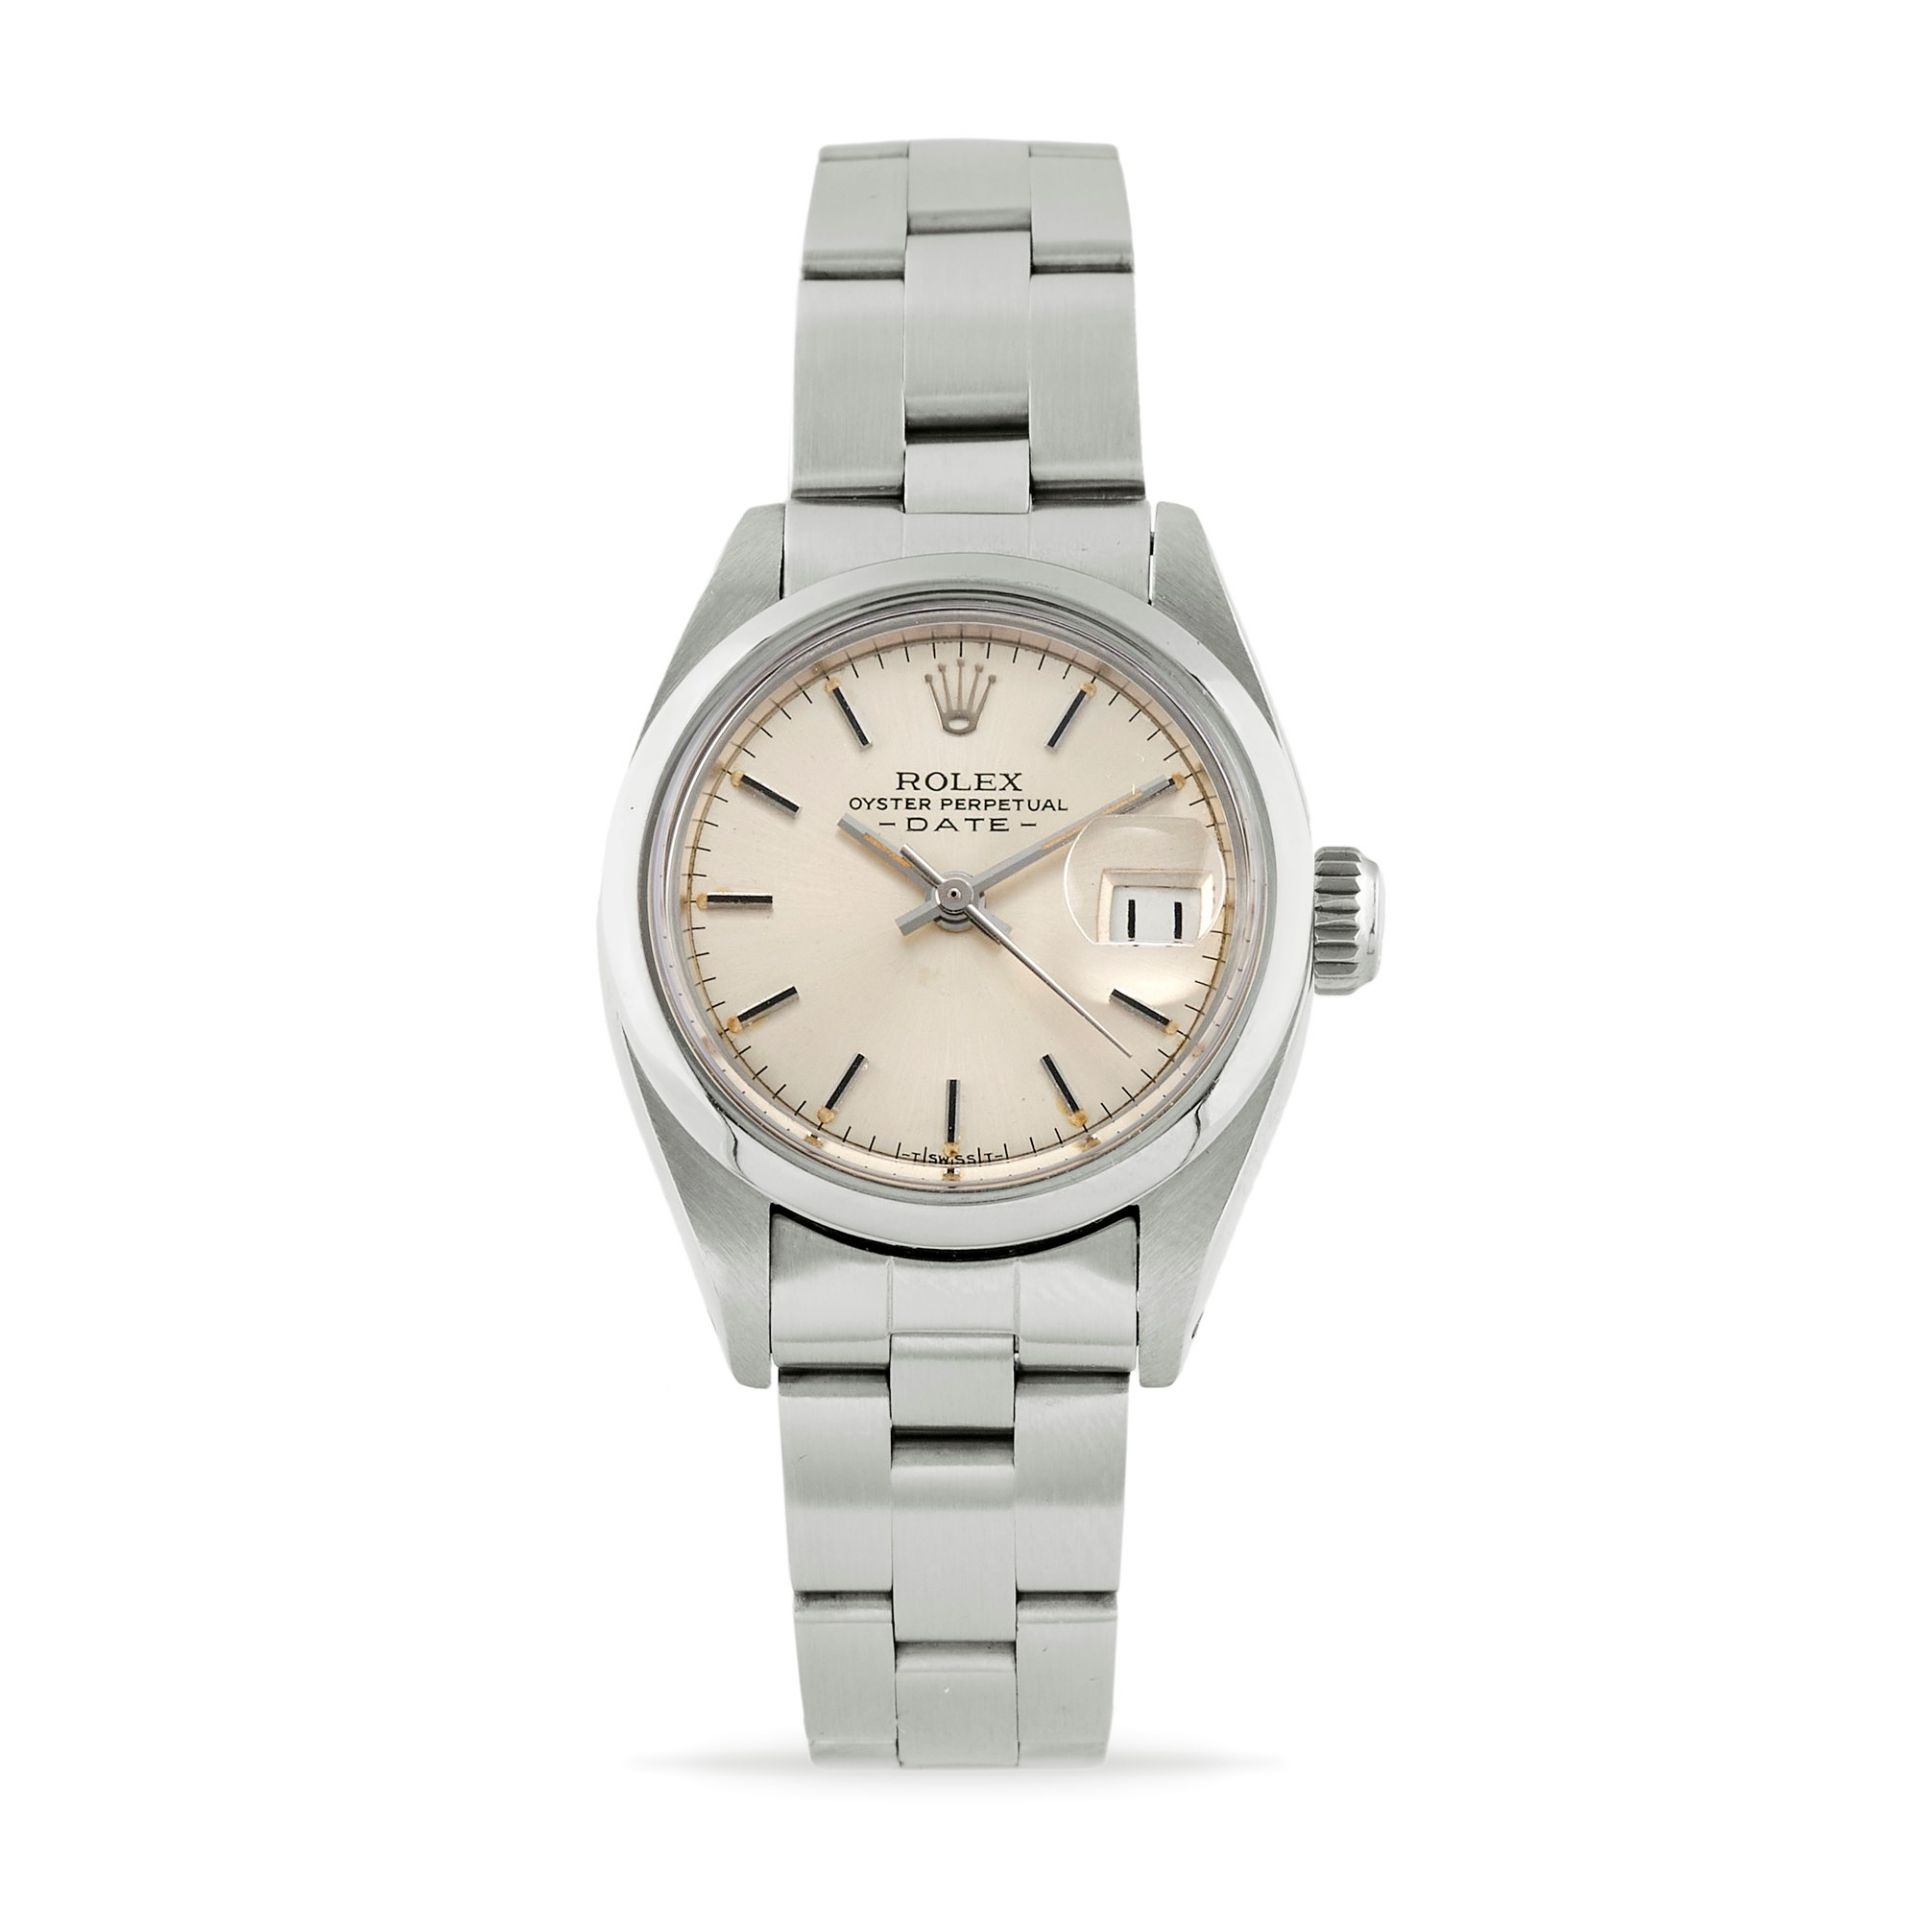 Rolex Oyster Perpetual Date 6916, ‘80s